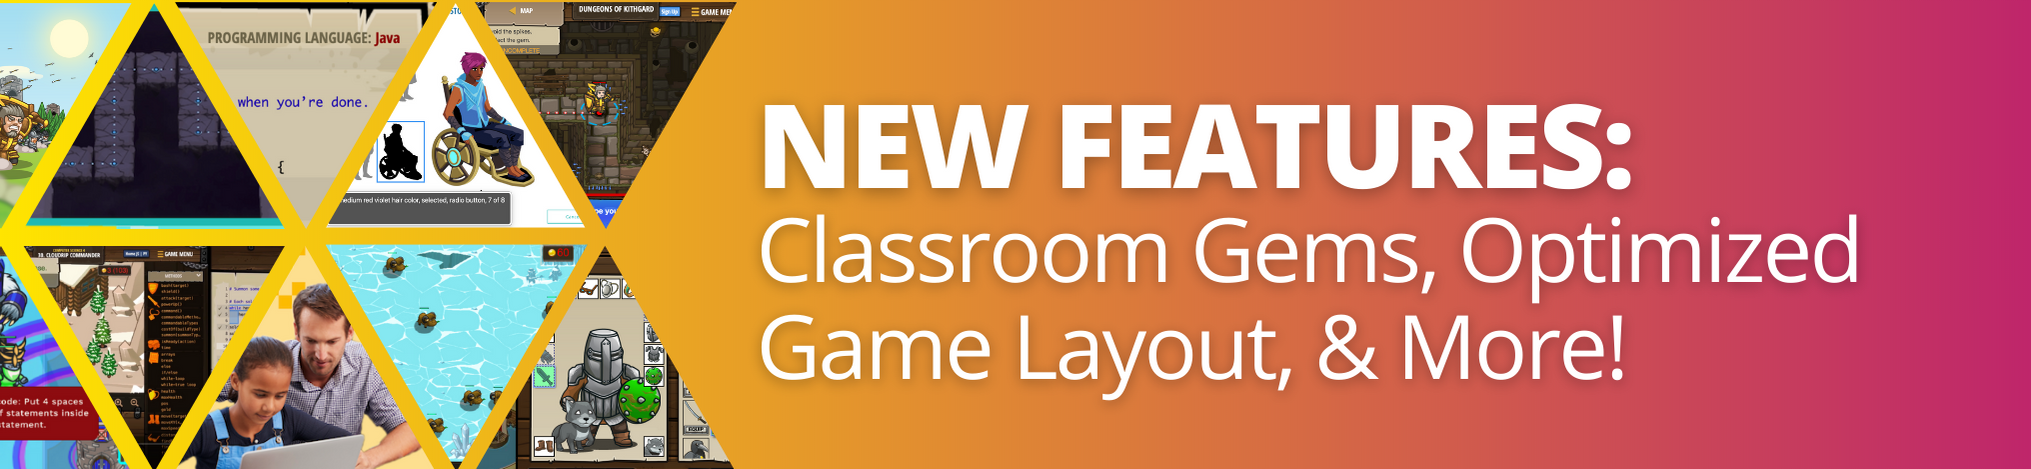 New Features: Classroom Gems, Optimized Game Layout, & More!